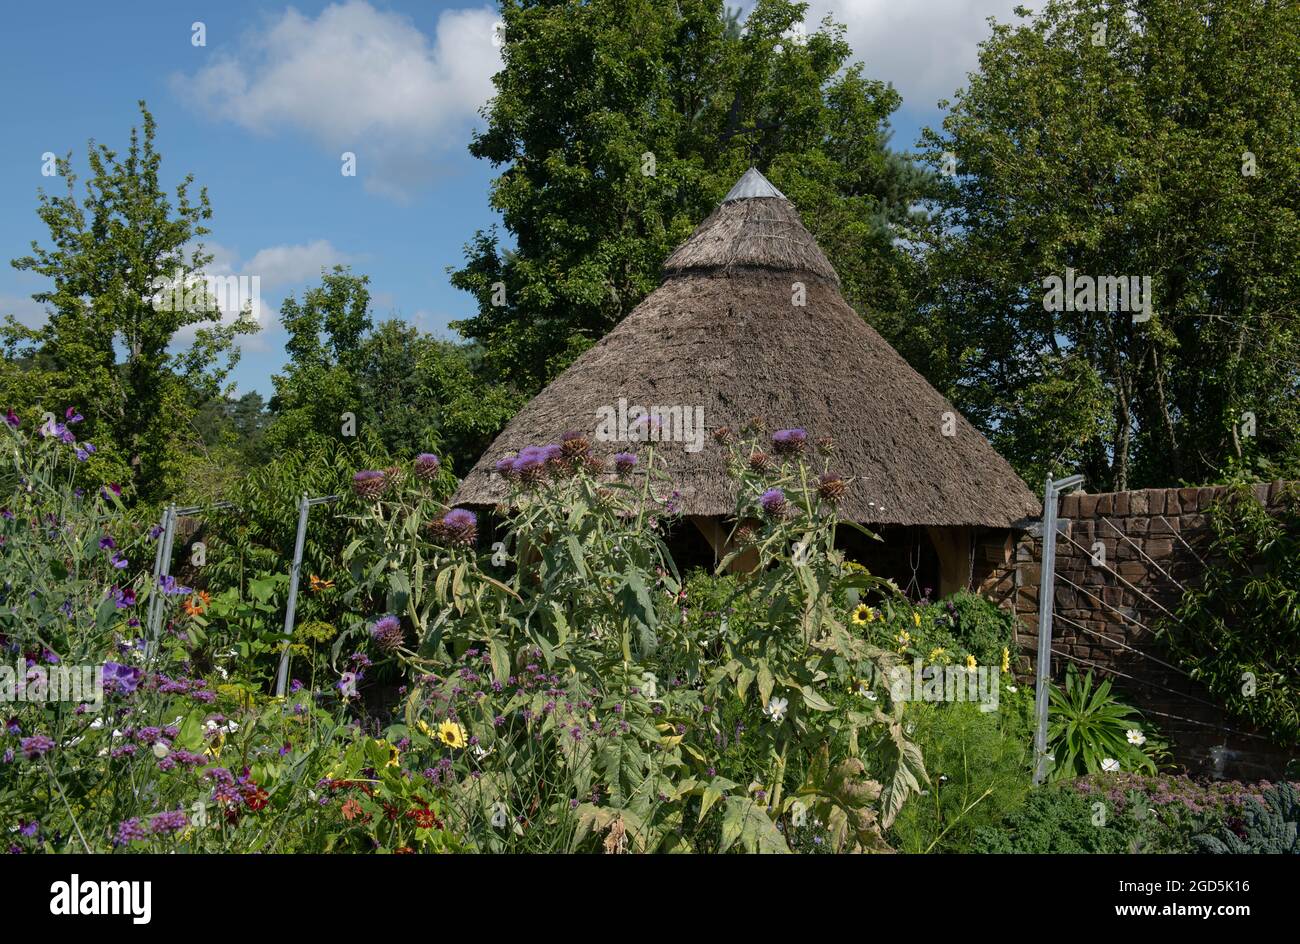 Summer Flowering Purple Flowers on an Artichoke Plant (Cynara cardunculus var. scolymus) in Front of a Conical Thatched Roof Summerhouse Stock Photo